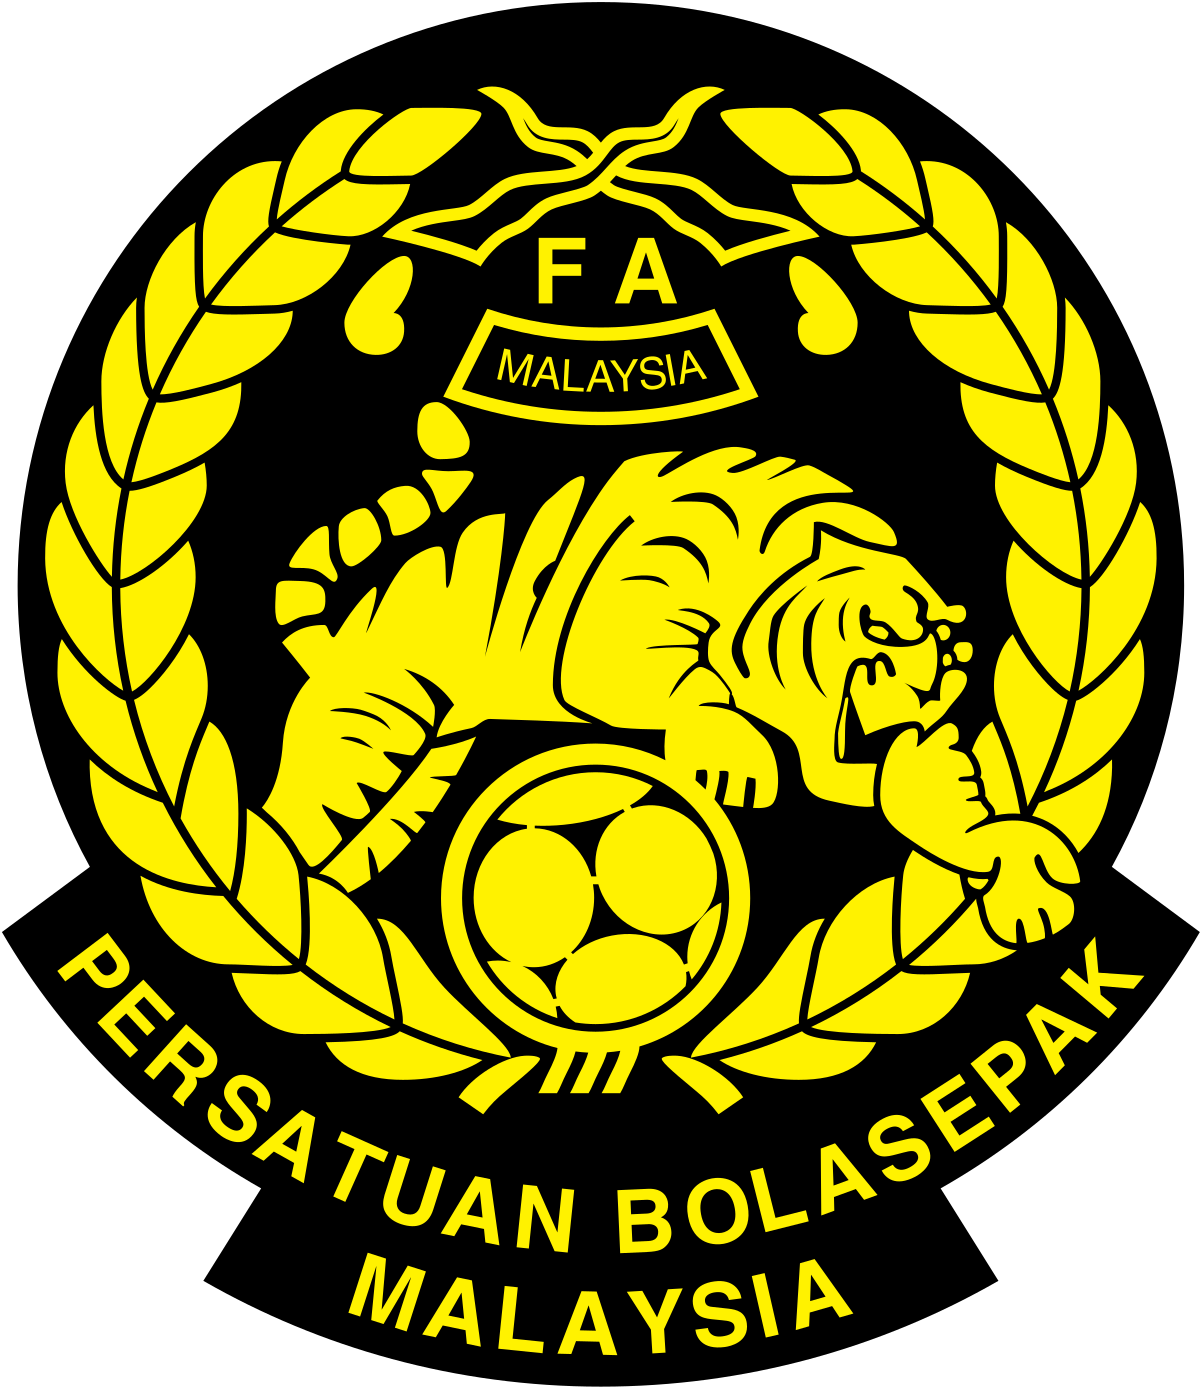 Is name team of football the malaysia national what Malaysia national